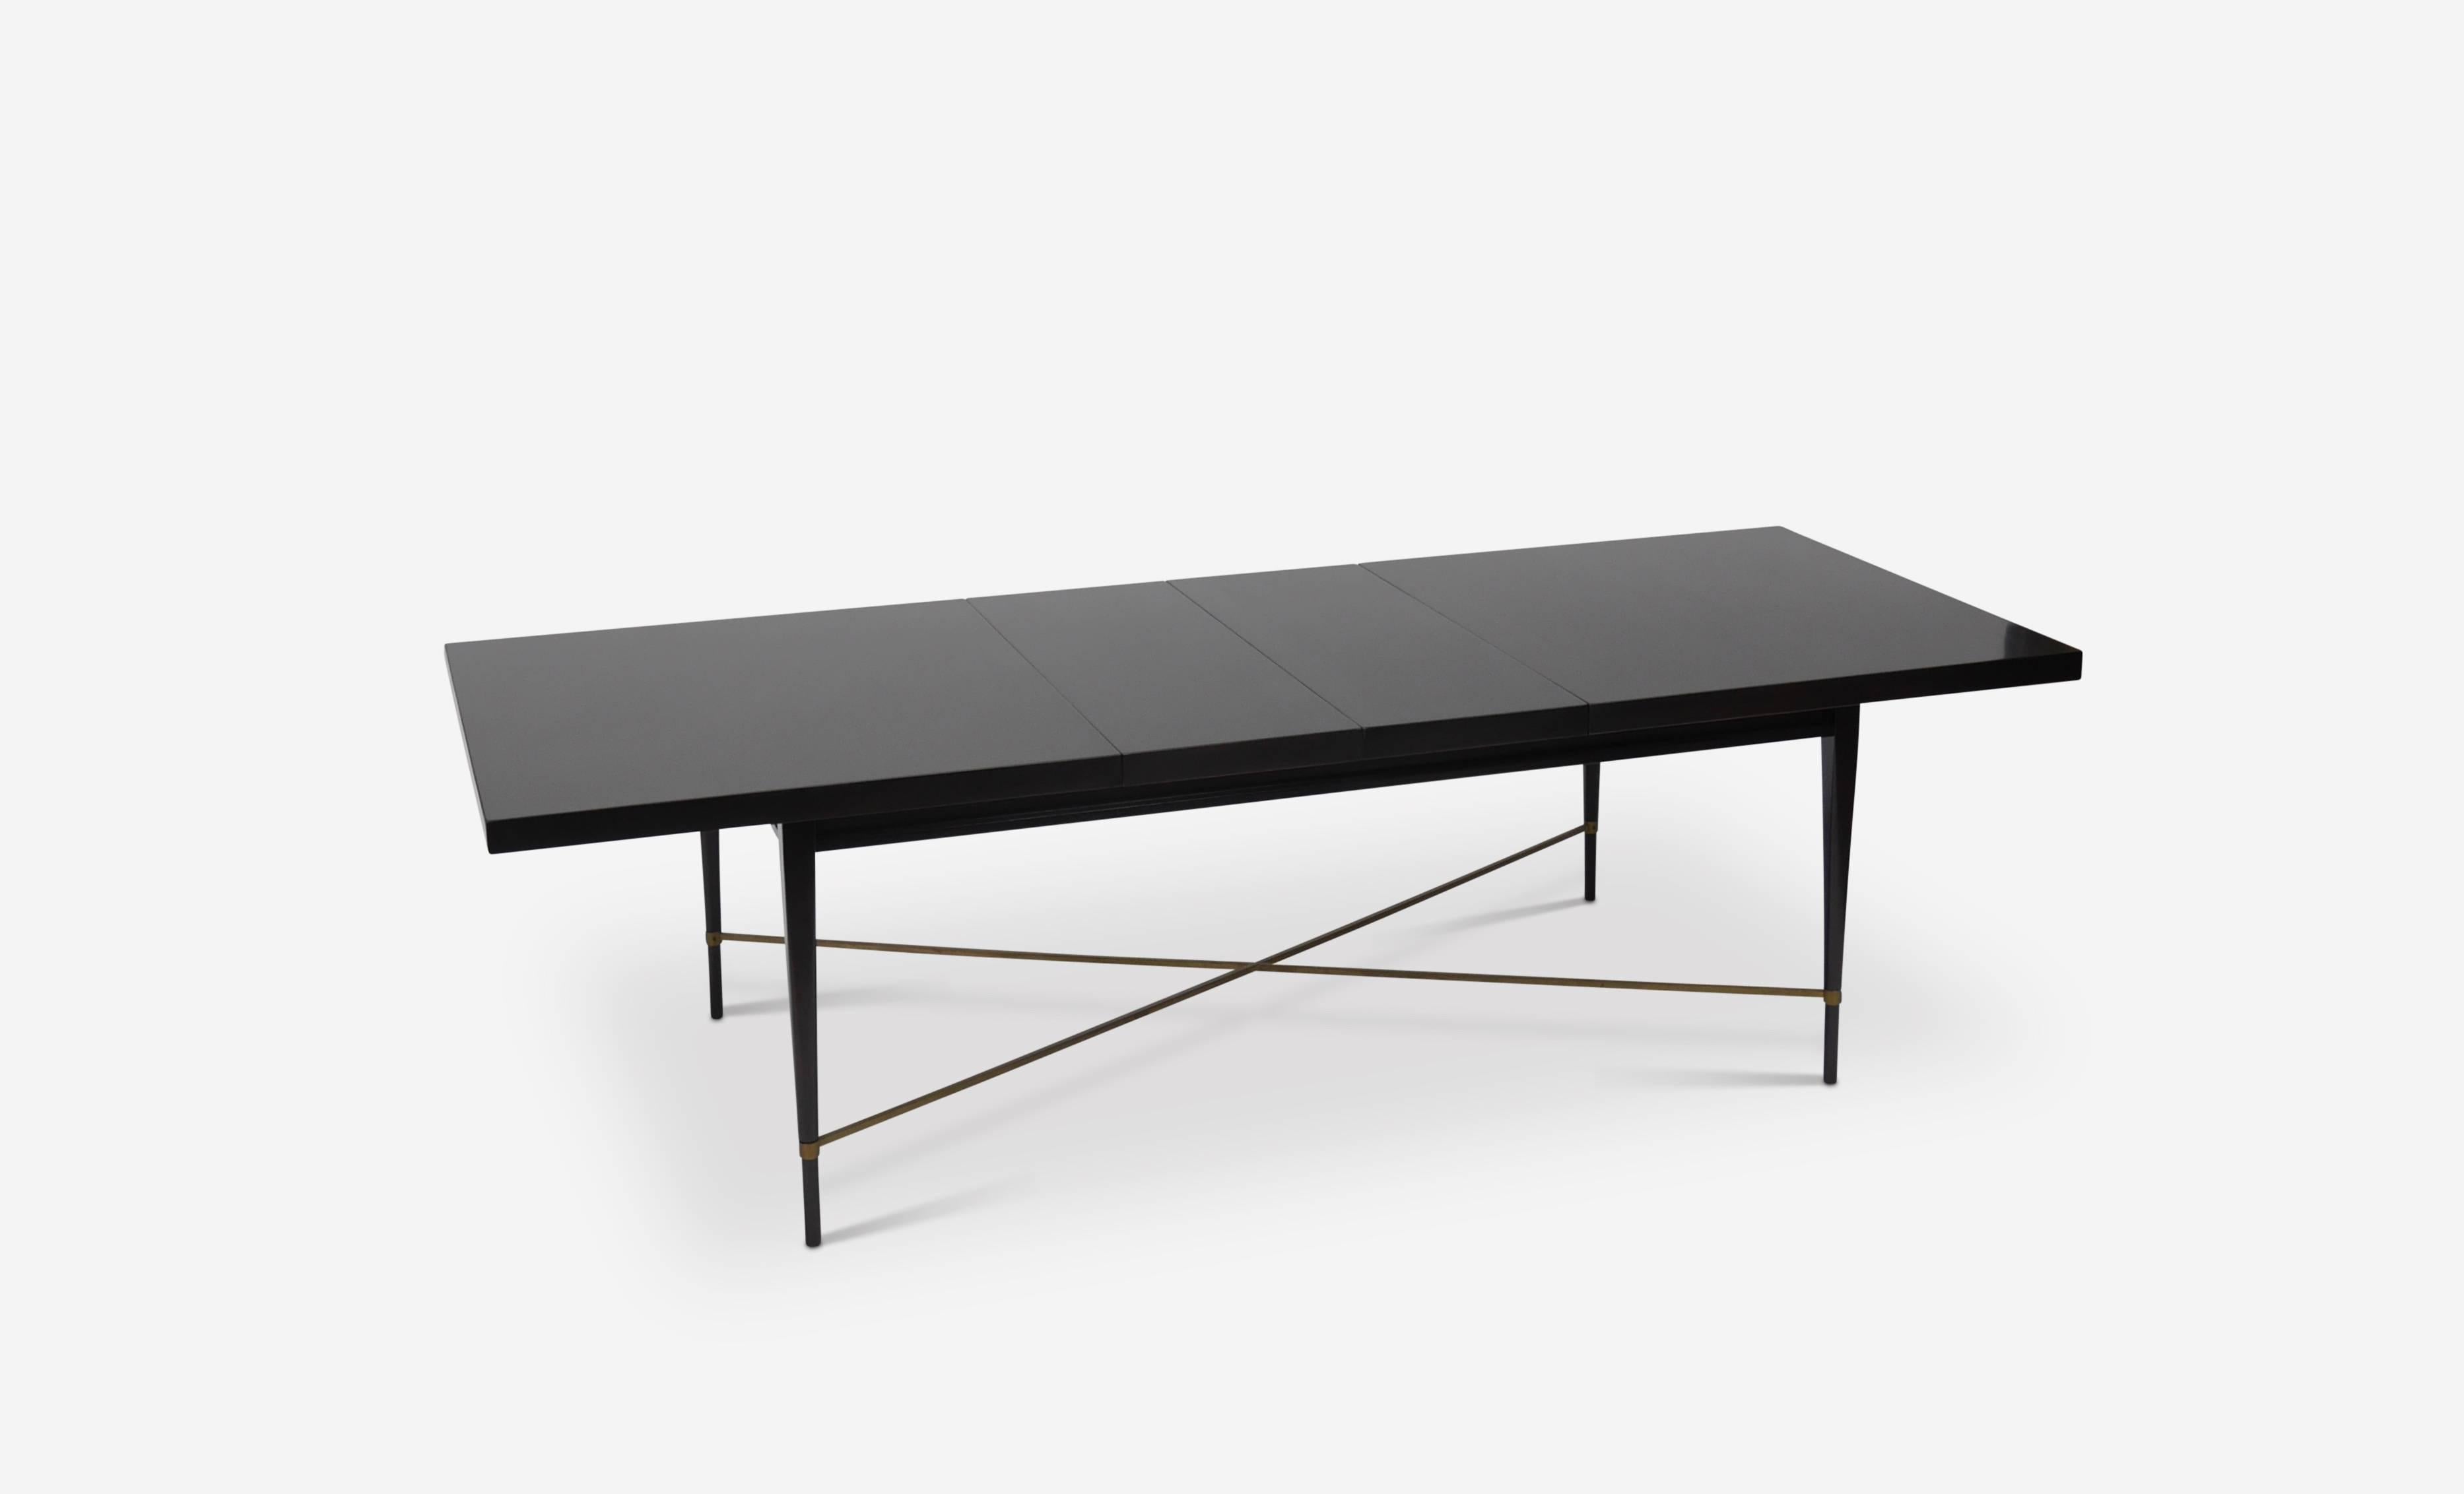 Large and elegant dining table by Paul McCobb for Directional / Irwin Collection

Model # 8909. The largest and most substantial dining table McCobb offered through Directional. The design features a brass stretcher, a stationary base and a top